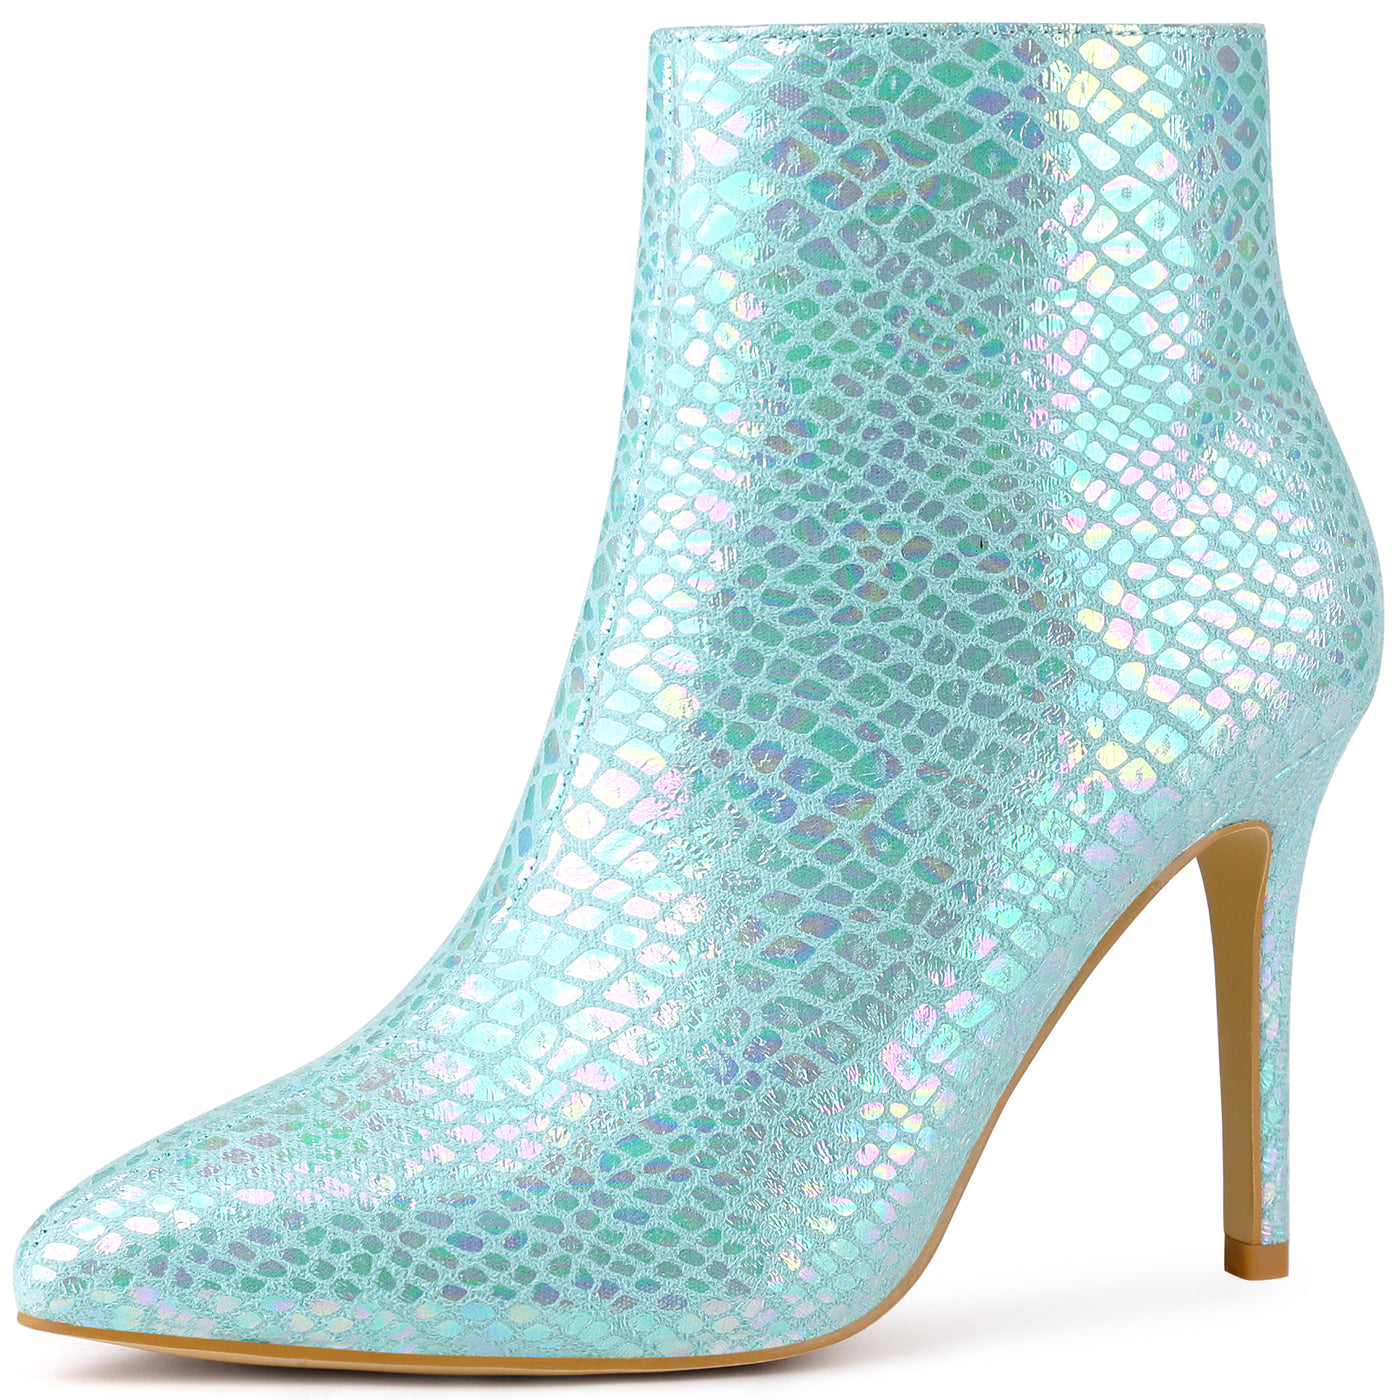 Bublédon Perphy Snake Print Pointed Toe Stiletto Heel Ankle Boots for Women